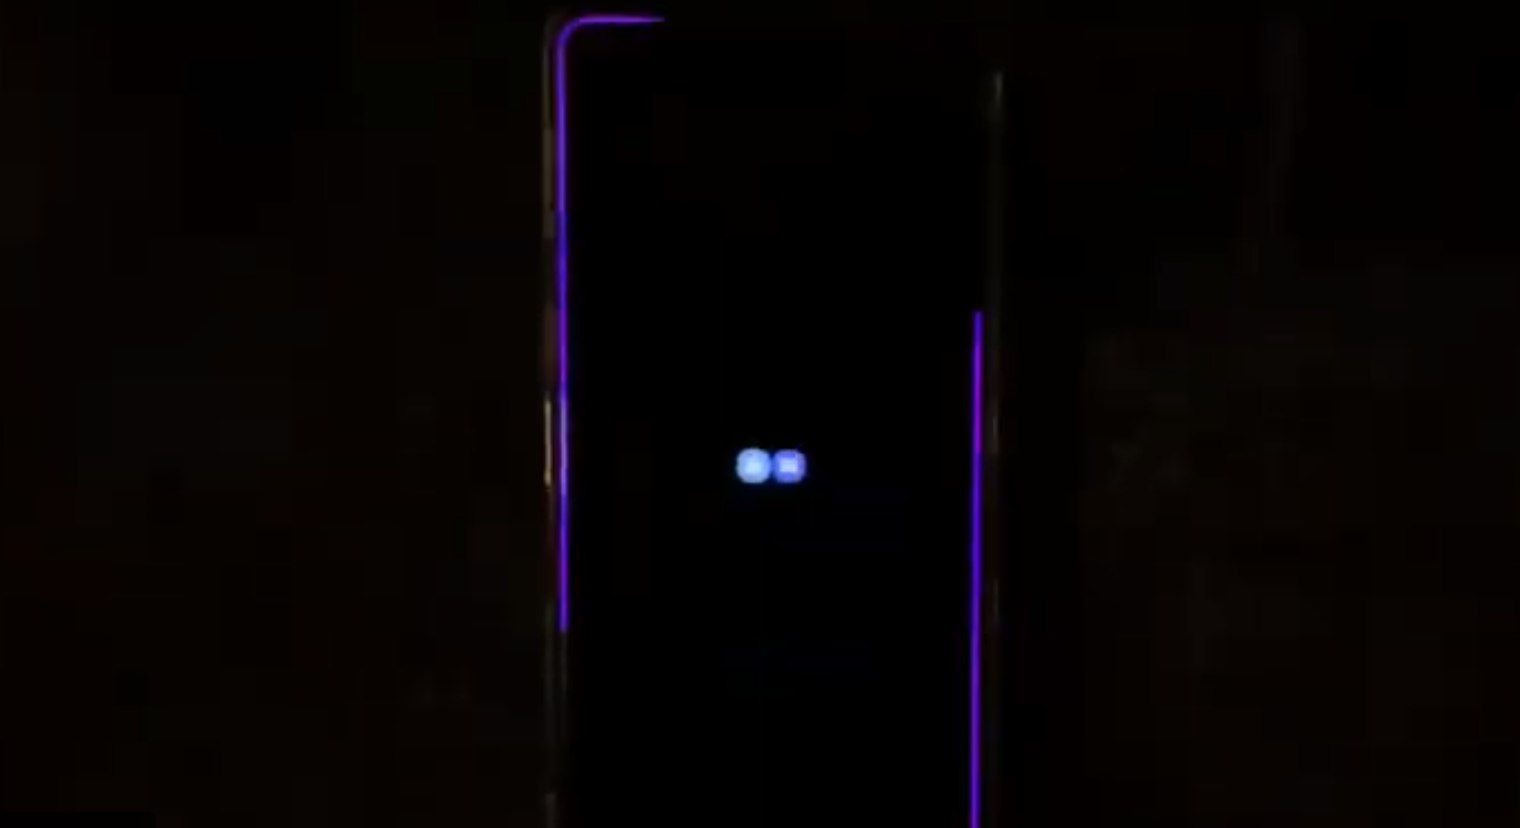 [New update] Samsung Galaxy S10 Edge Lighting not working as expected? You aren't alone